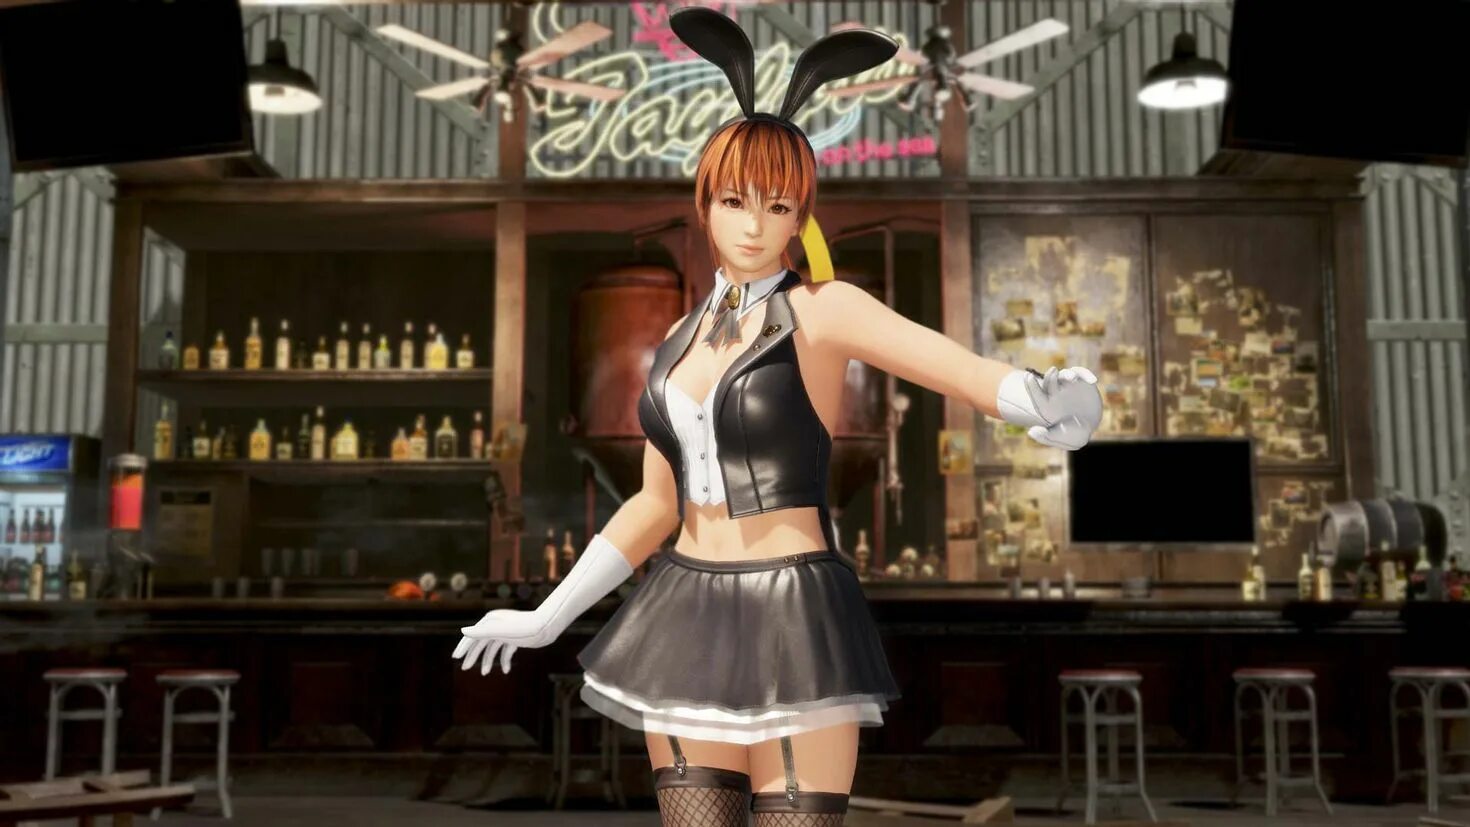 Dead or Alive 6 Касуми. Касуми Dead or Alive костюмы. Dead or Alive 6 Kasumi Costume. Dead or Alive 6 Касуми костюмы.